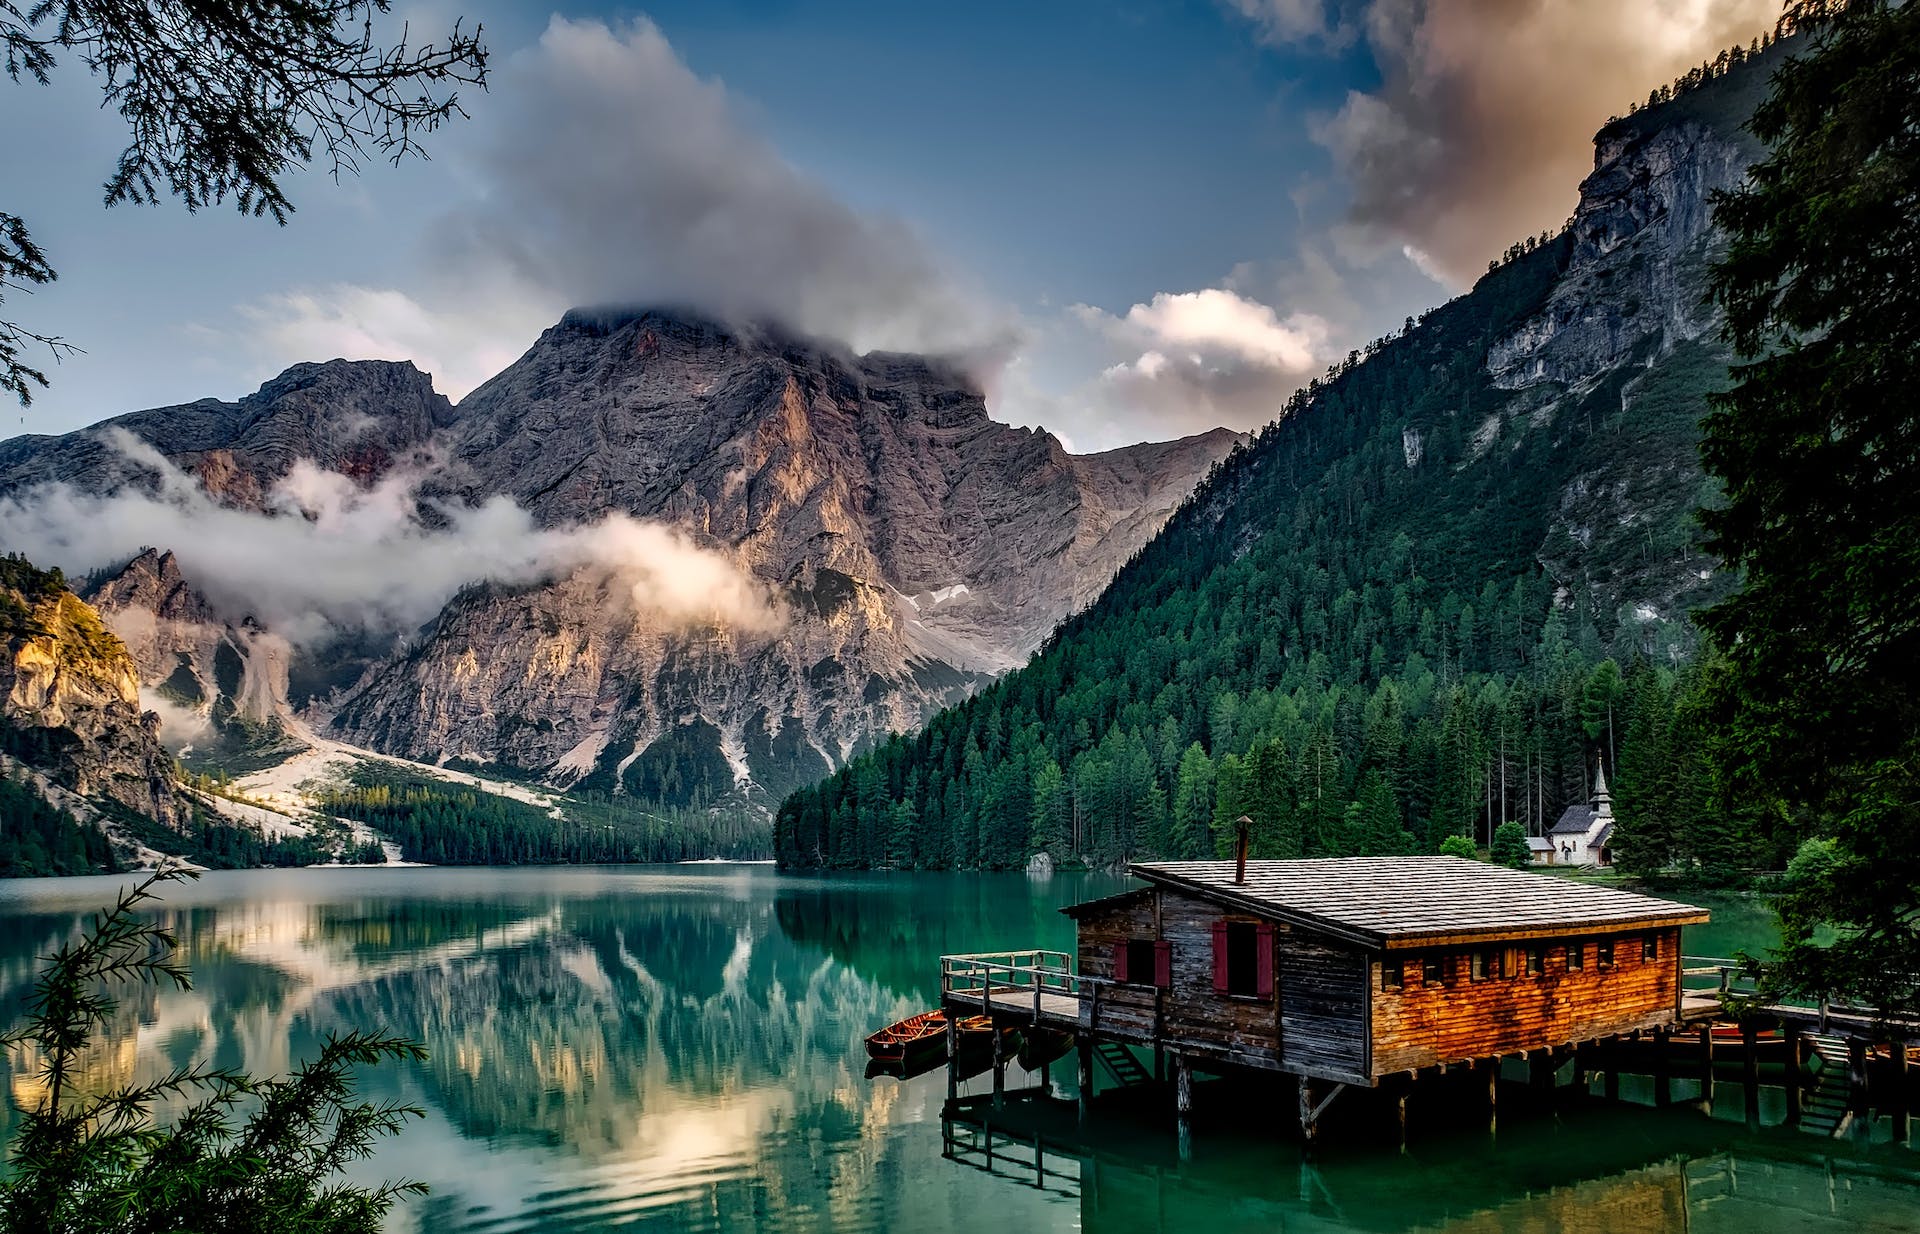 A wooden house in the middle of a lake overlooking the mountains | Source: Pexels